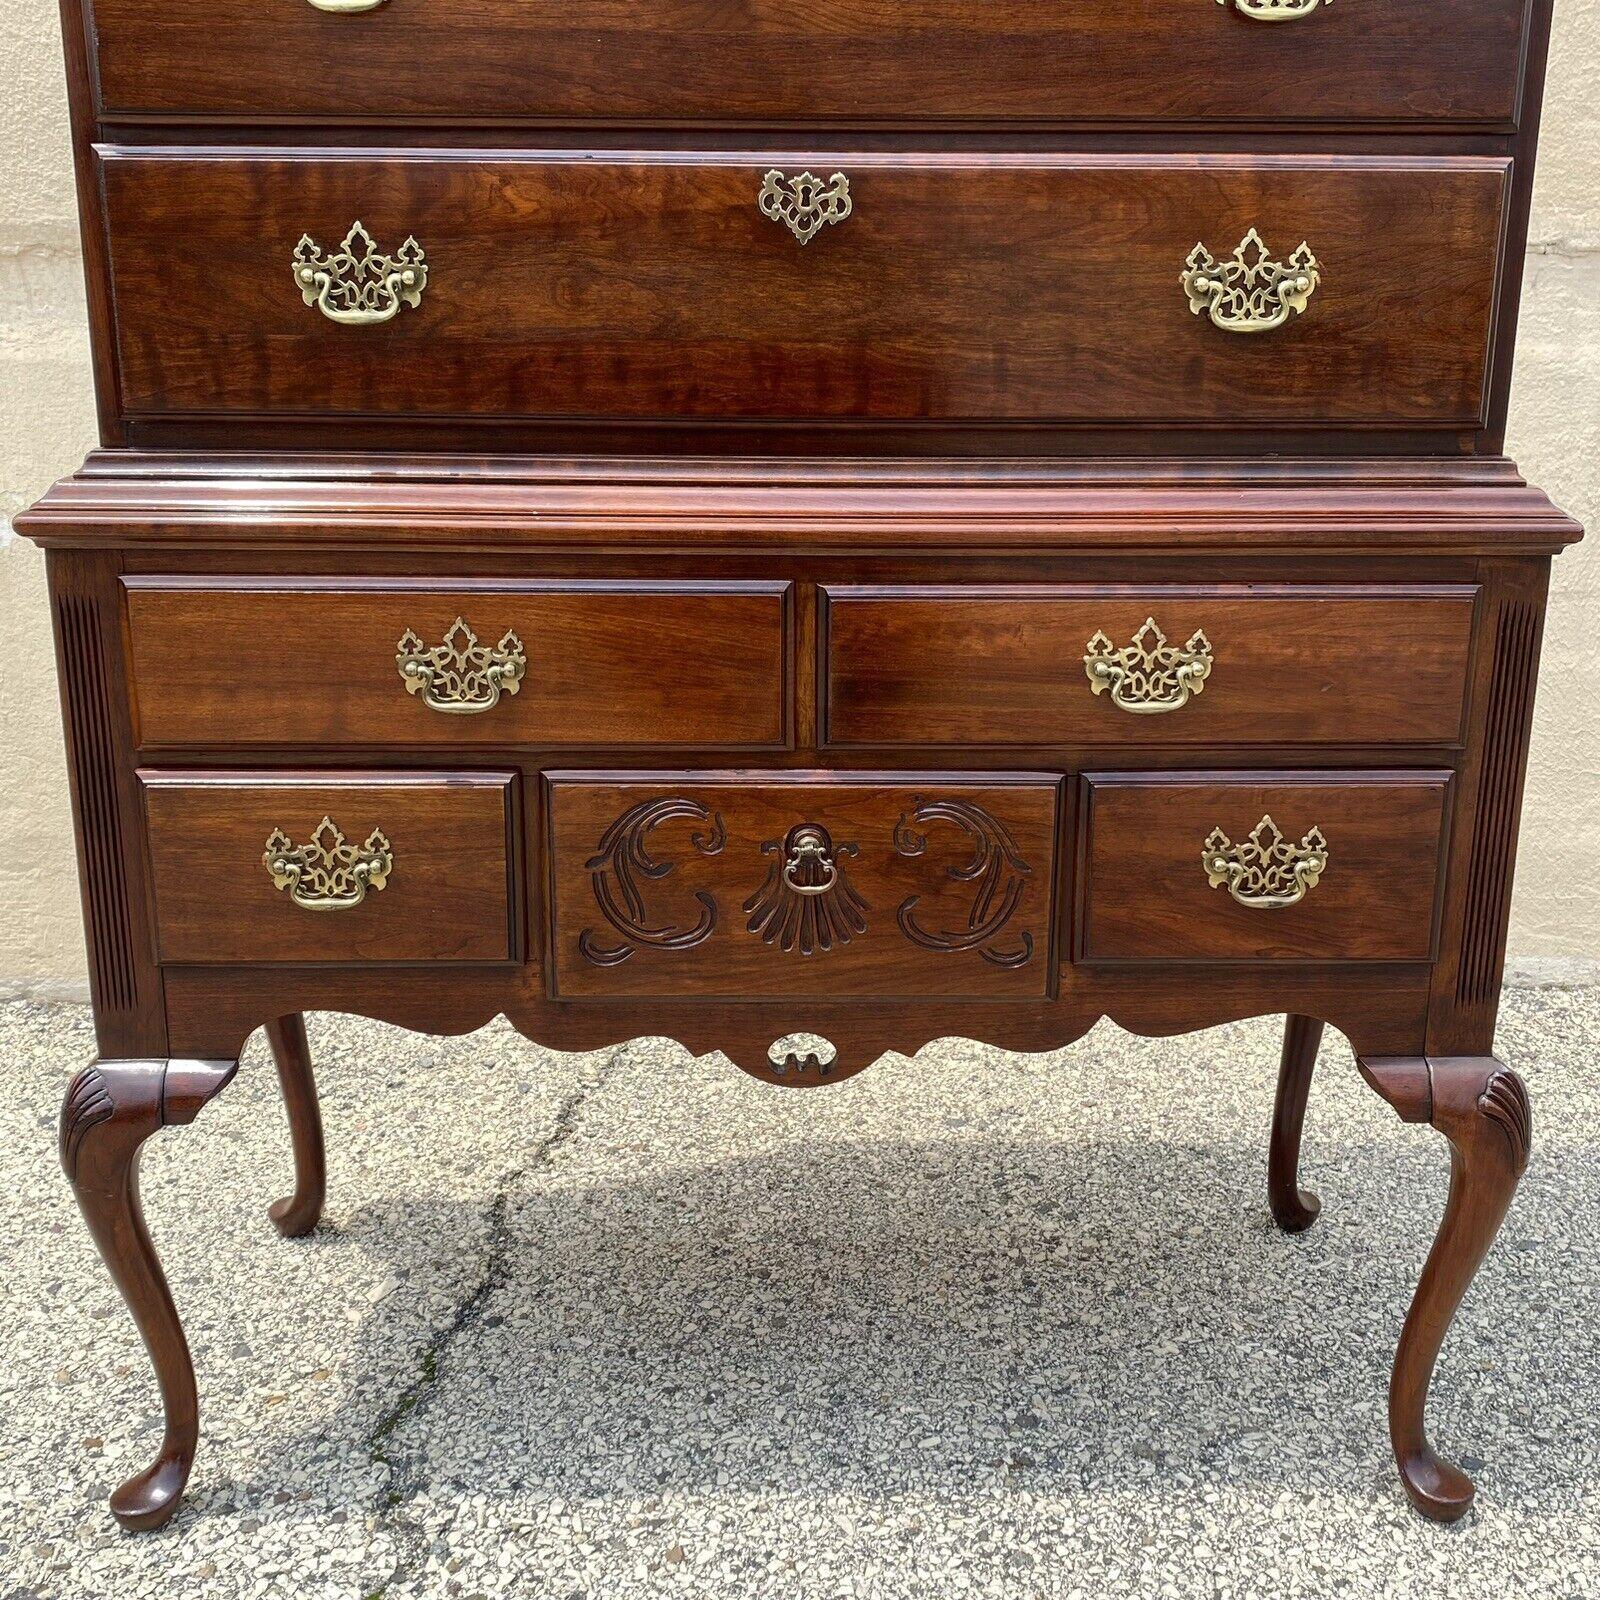 Thomasville Cherry Wood Queen Anne Style Highyboy Tall Chest Dresser For Sale 1